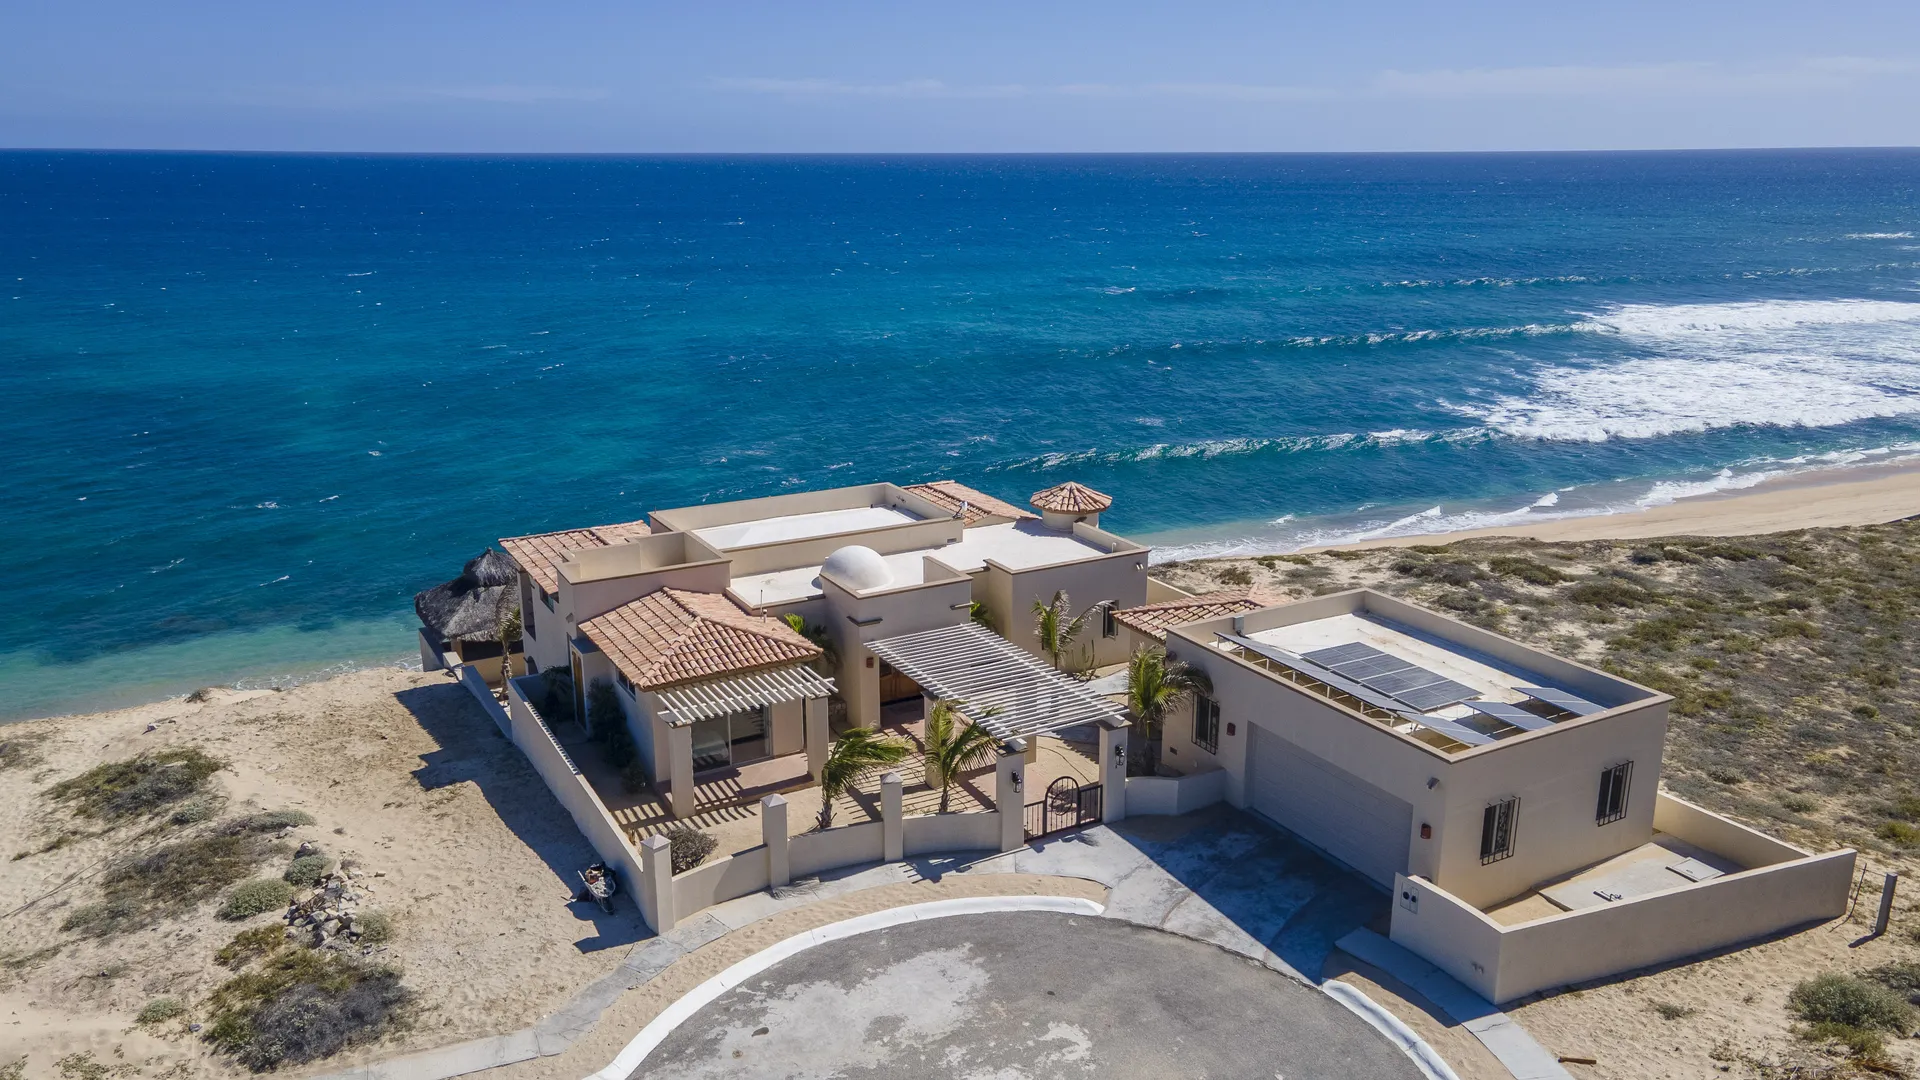 Casa Vista Perfecta is an impeccably maintained 4-bedroom 2.5 bath 2-story home overlooking the famed Punta Perfecta surf break